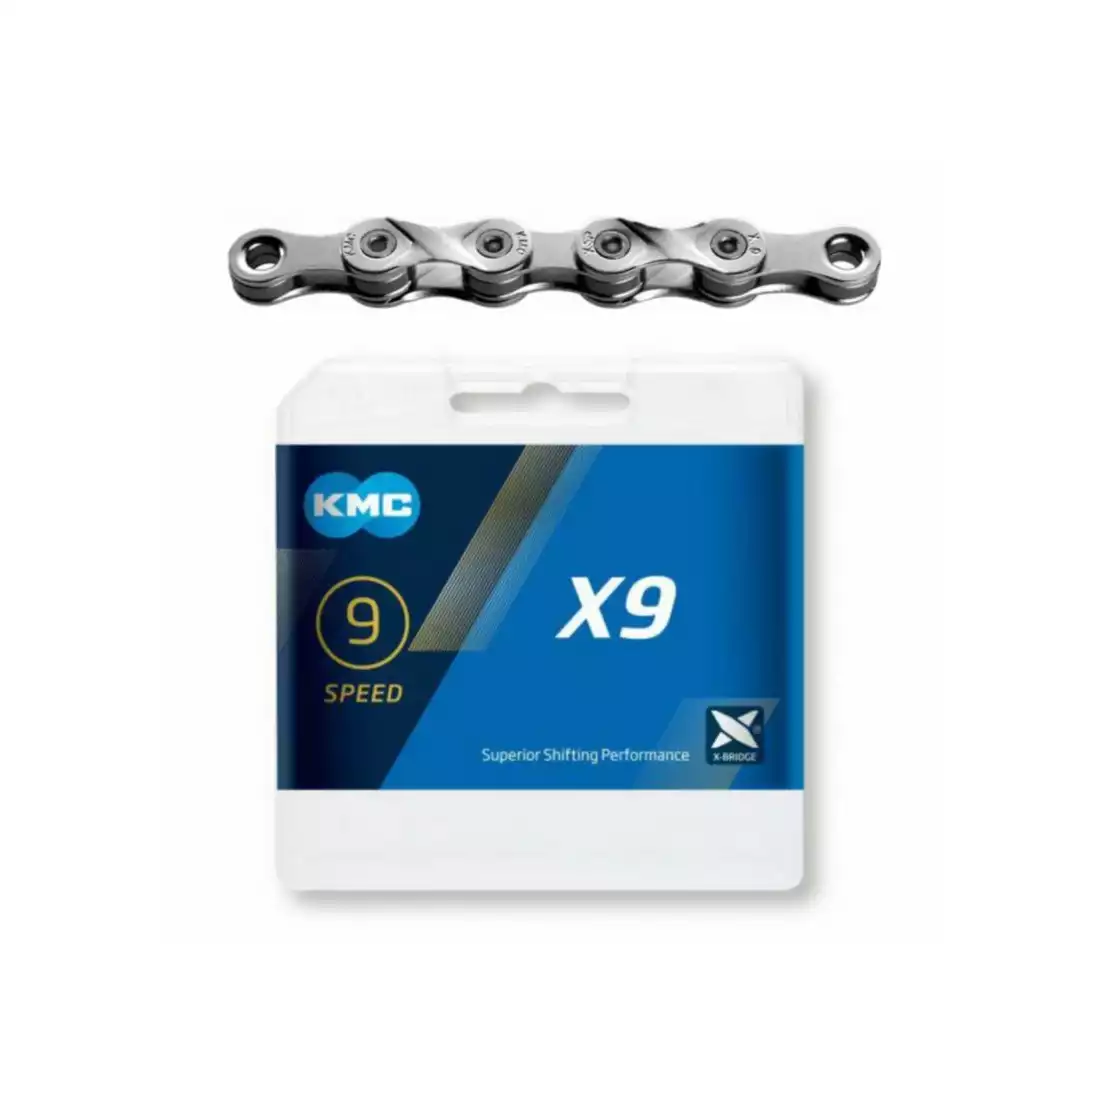 KMC X9 Bicycle chain, 9-speed, 114 links, silver